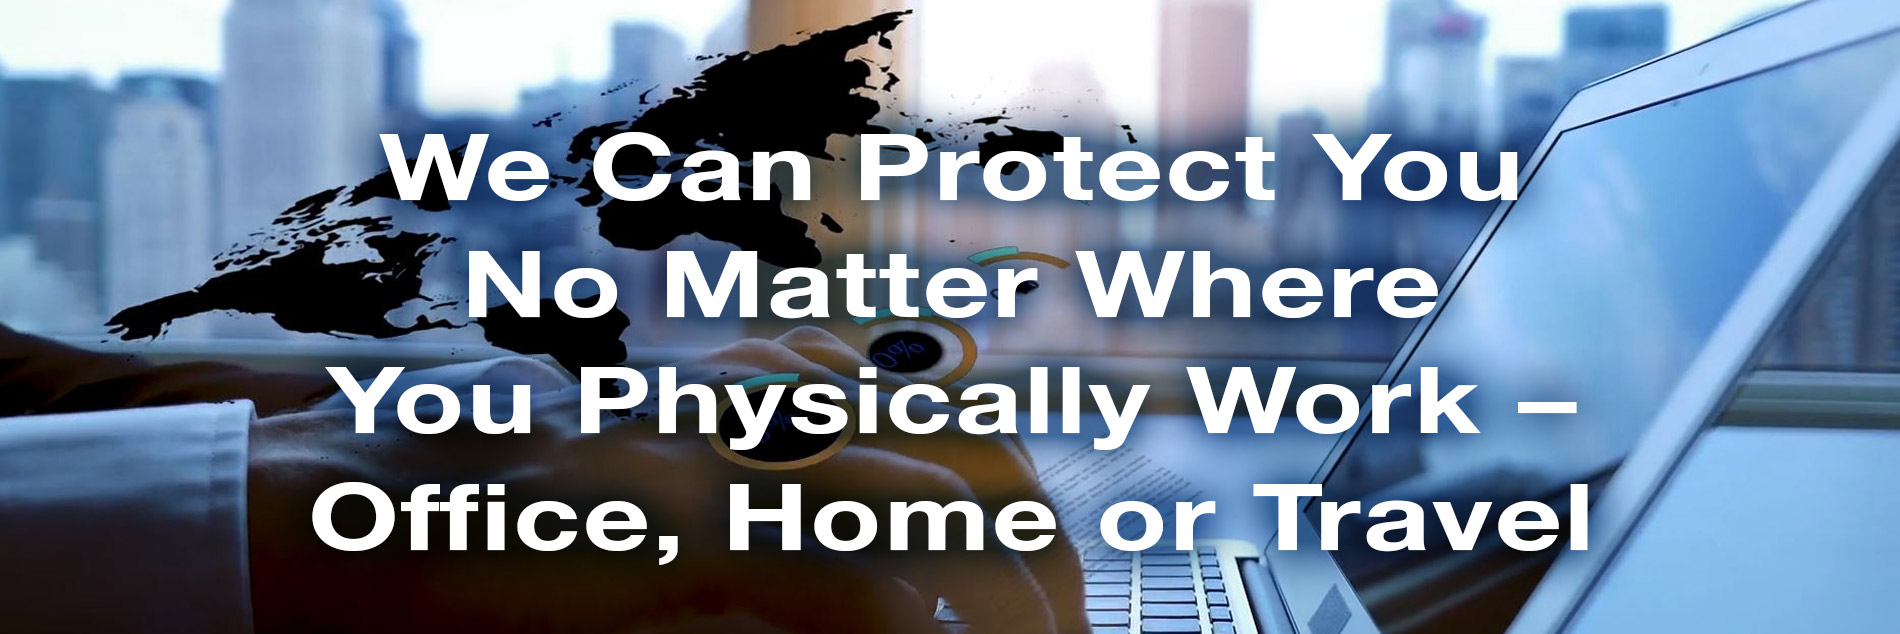 We Can Protect You No Matter Where You Physically Work - Office, Home or Travel